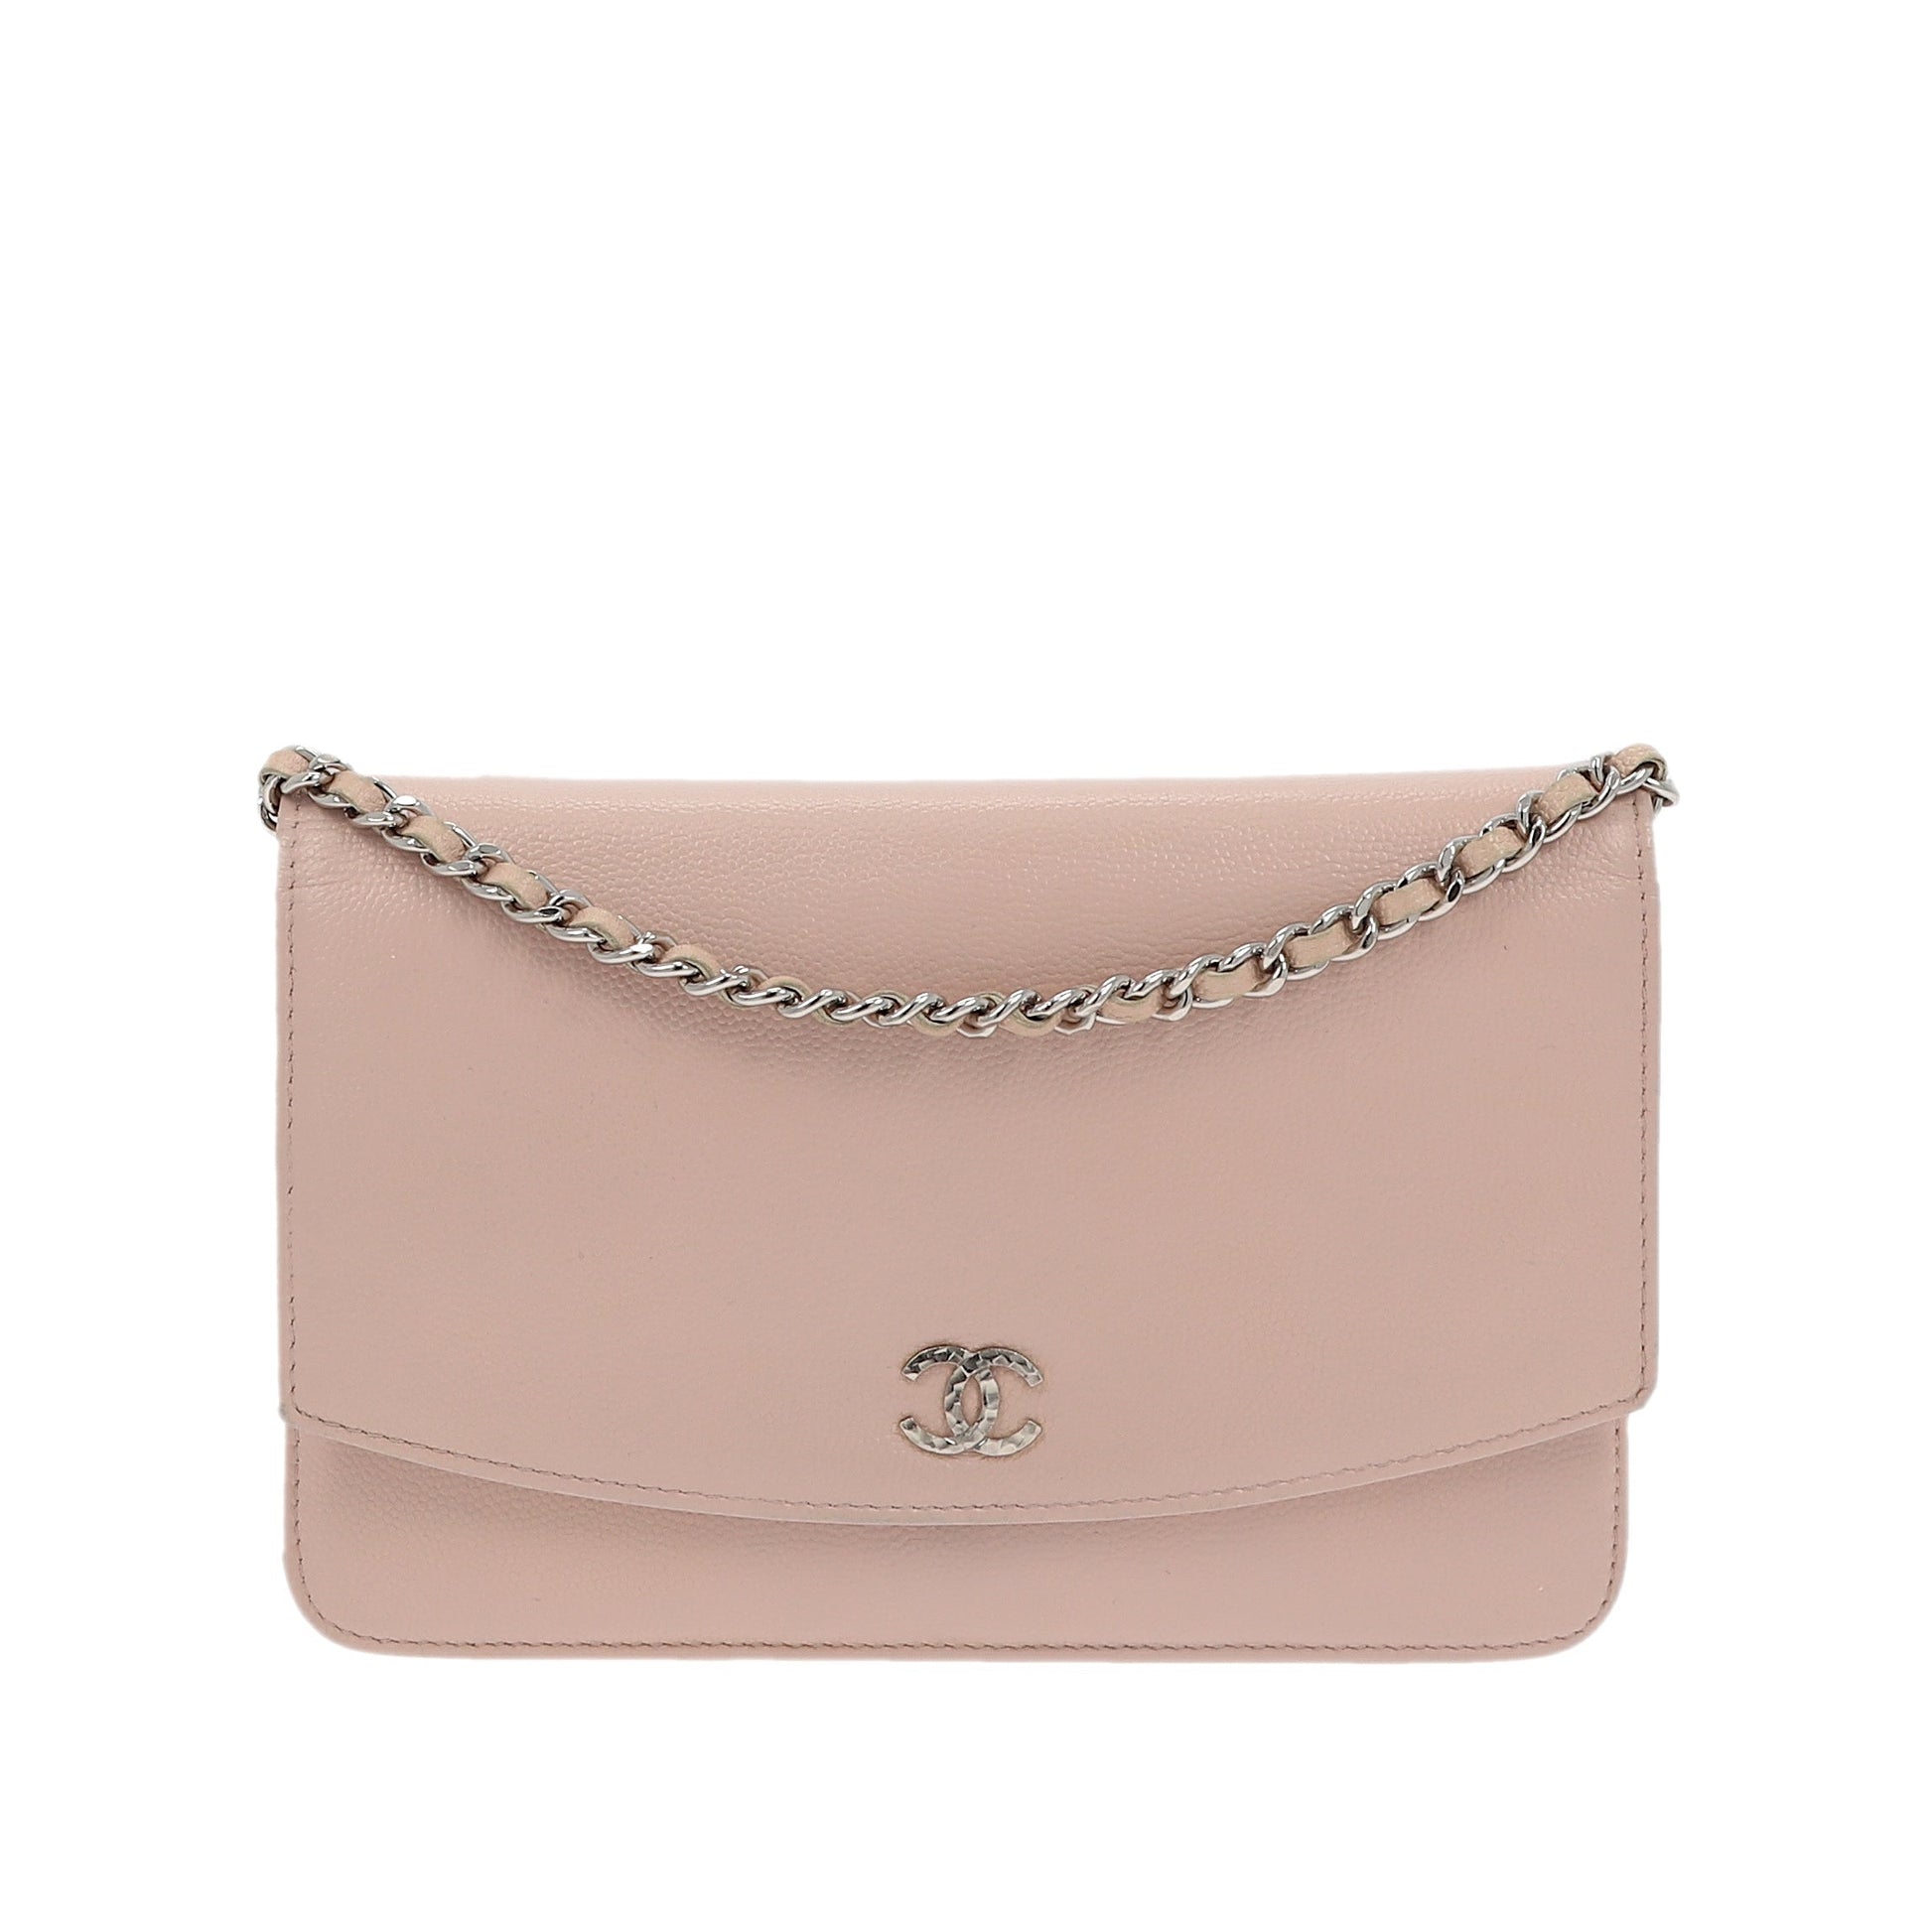 CHANEL WOC Wallet on Chain Pochette in Pink Leather